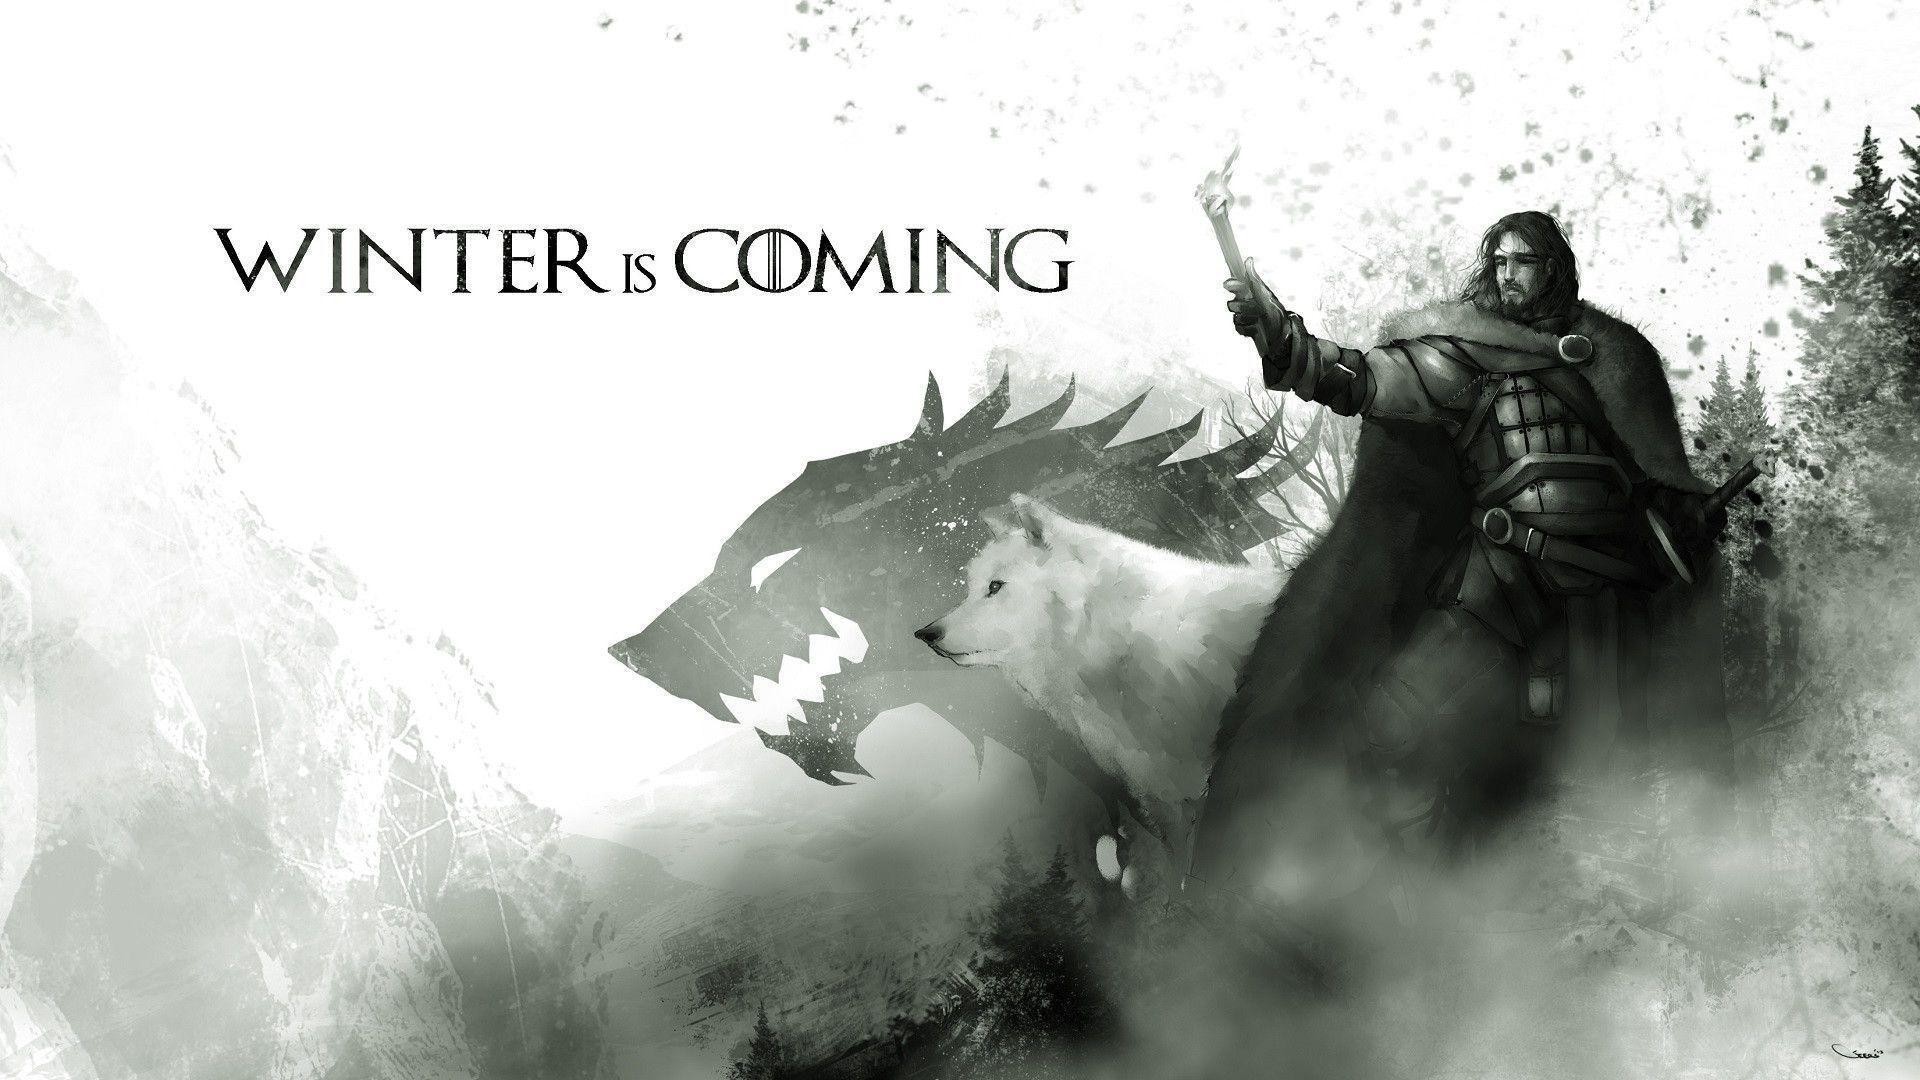 1920x1080 Wallpapers For > Game Of Thrones Wallpaper Hd Winter Is Coming